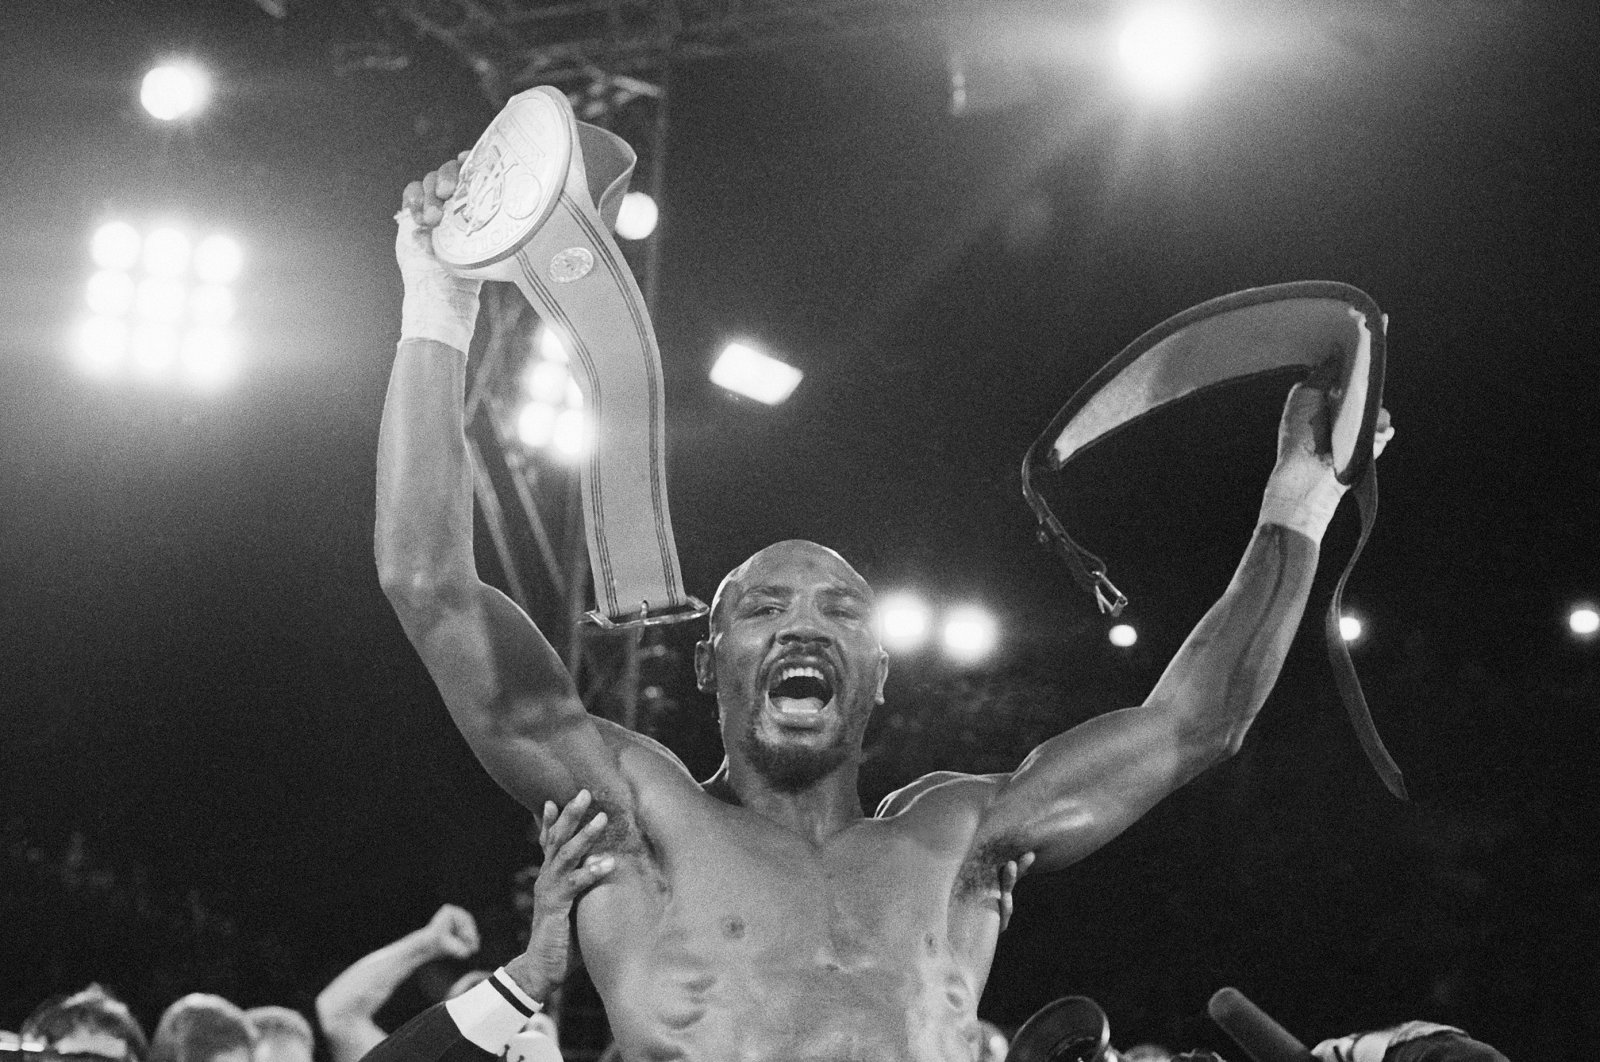 In this November 1983 file photo, Marvin Hagler celebrates his unanimous-decision victory over Roberto Duran in a boxing bout in Las Vegas. (AP Photo)